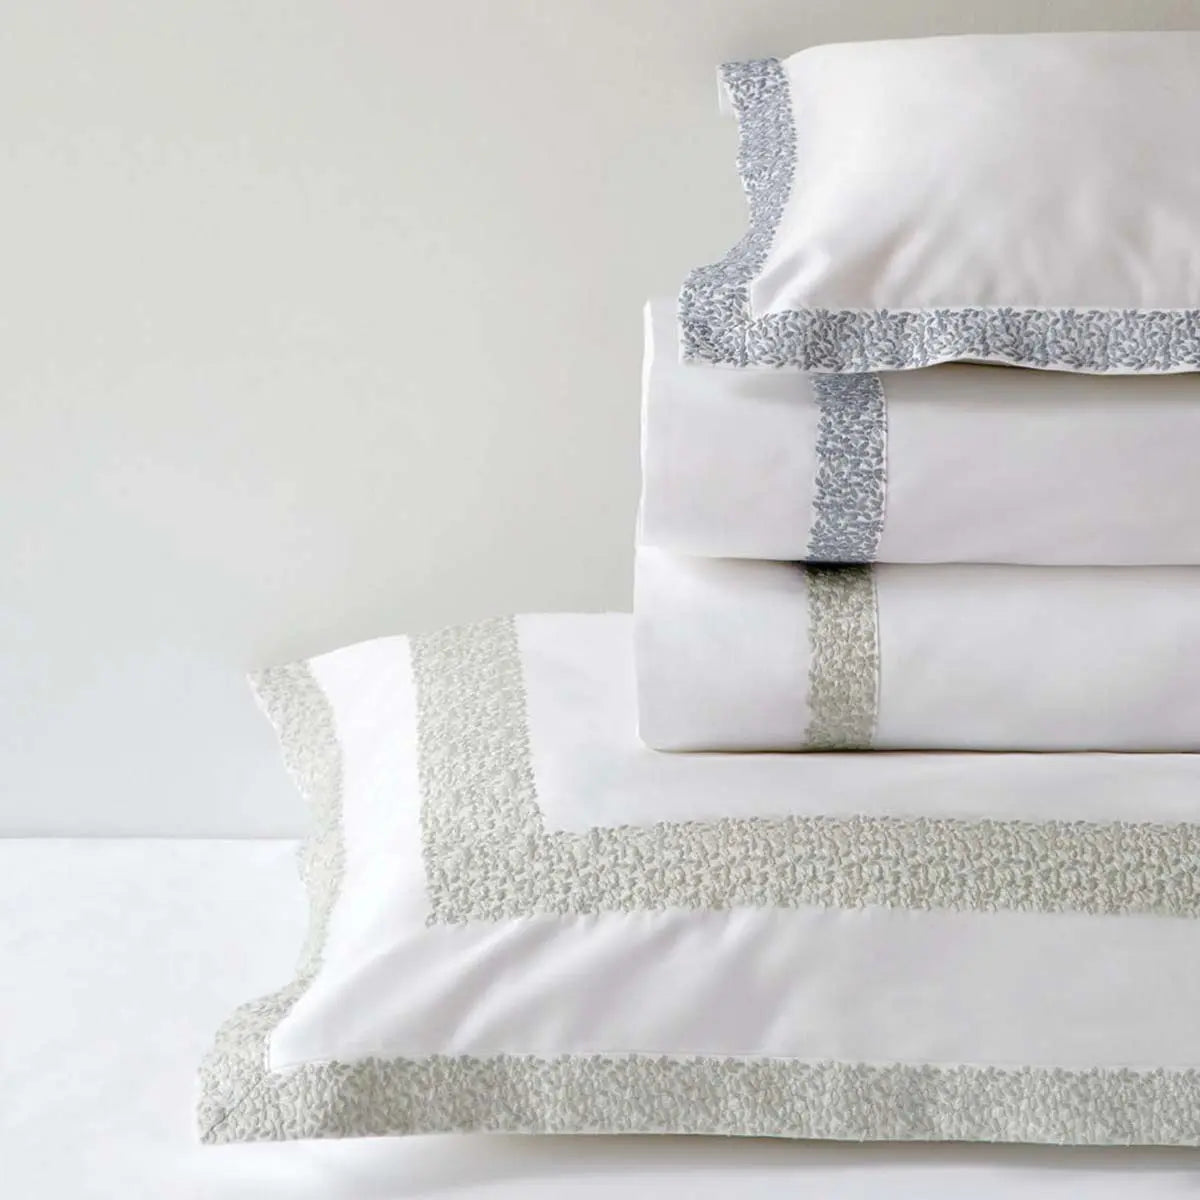 Bovi Malone Sheet Set and shams in various color stacked together